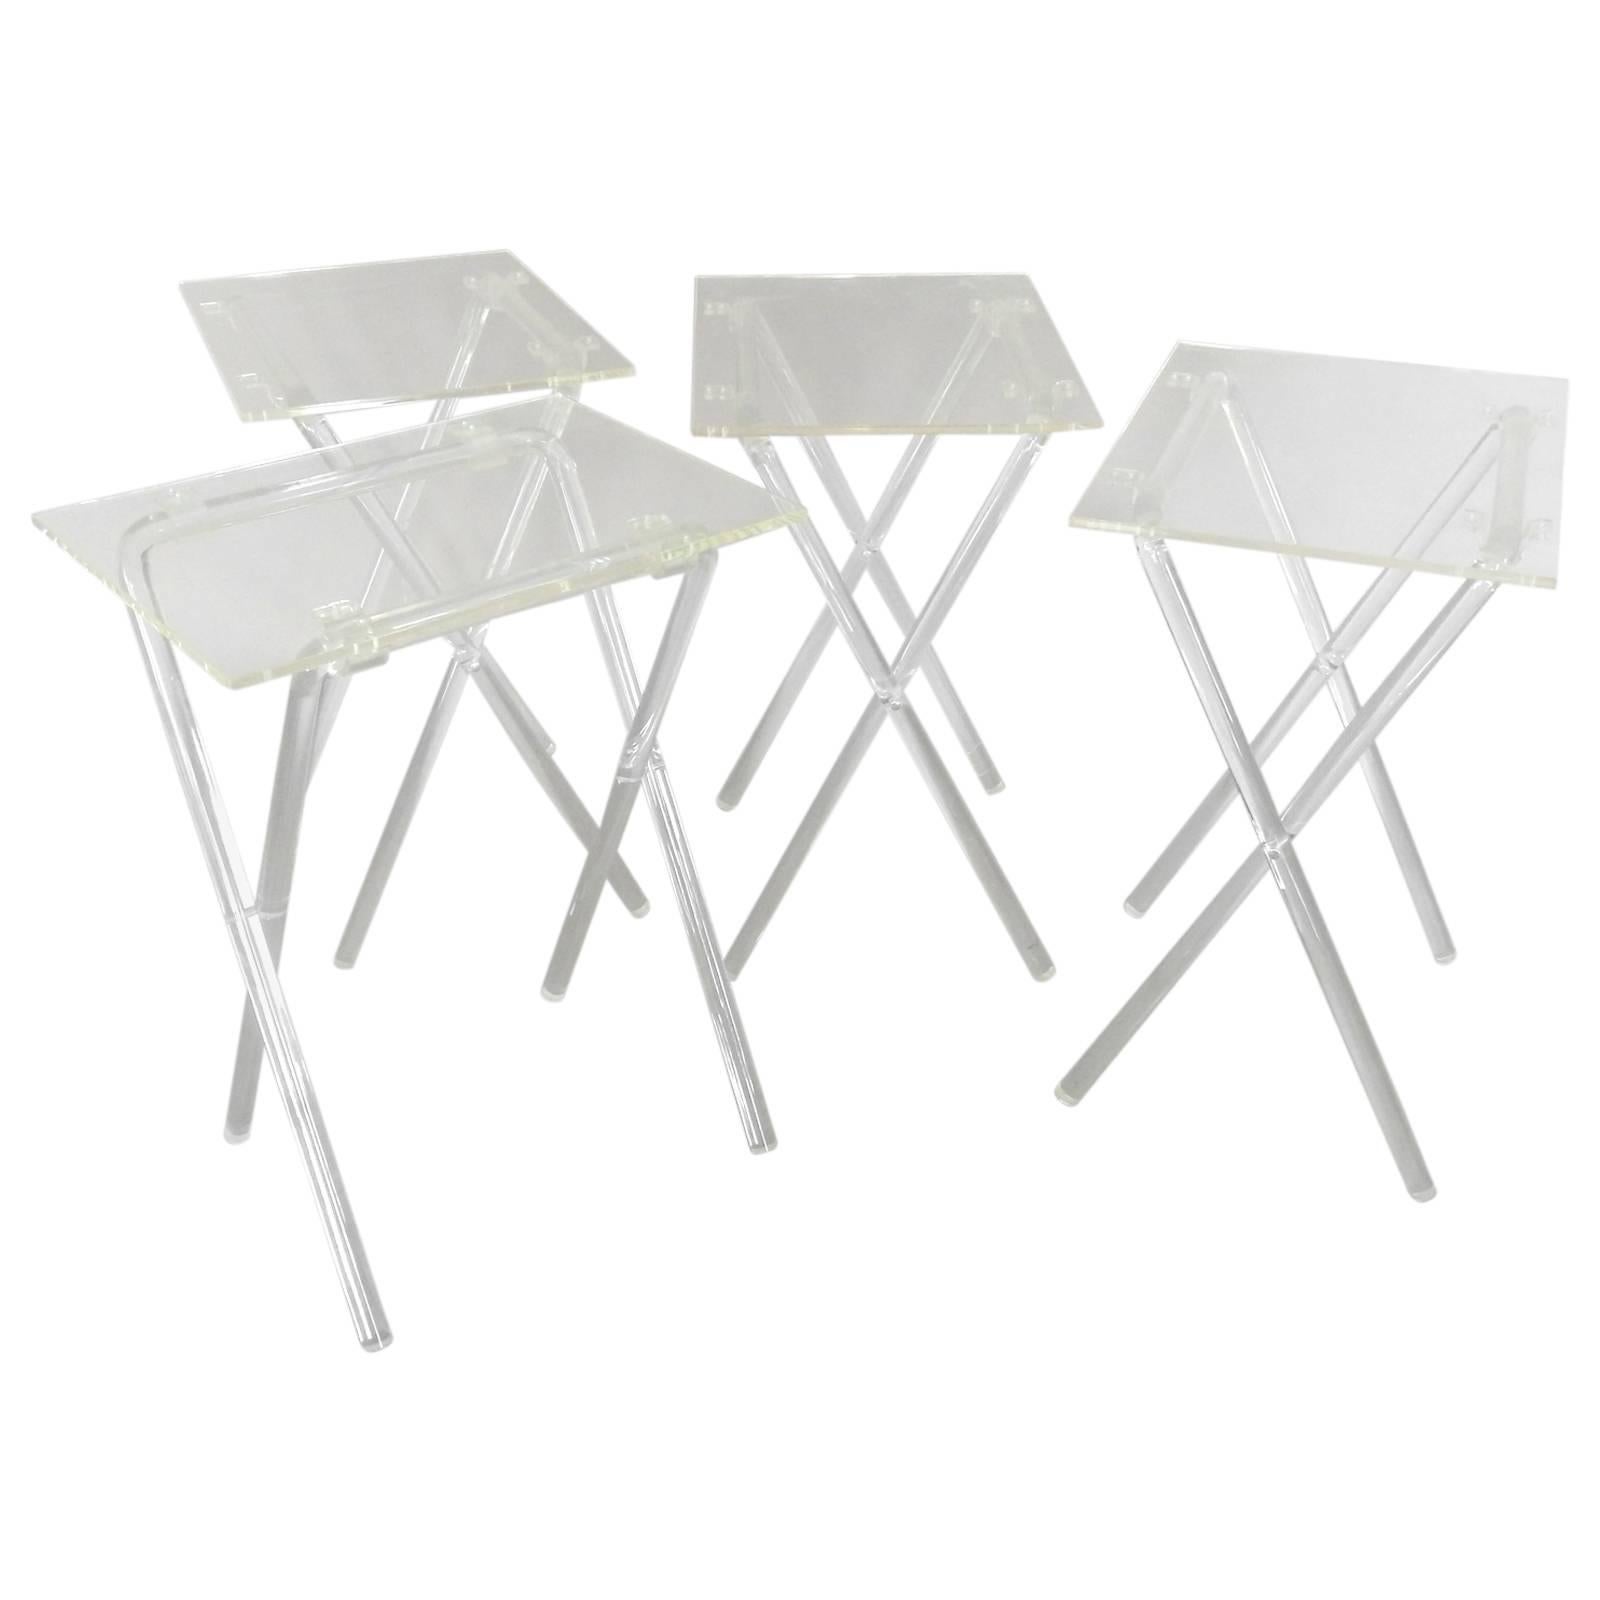 Nest of Four Lucite Folding Tables with Stand